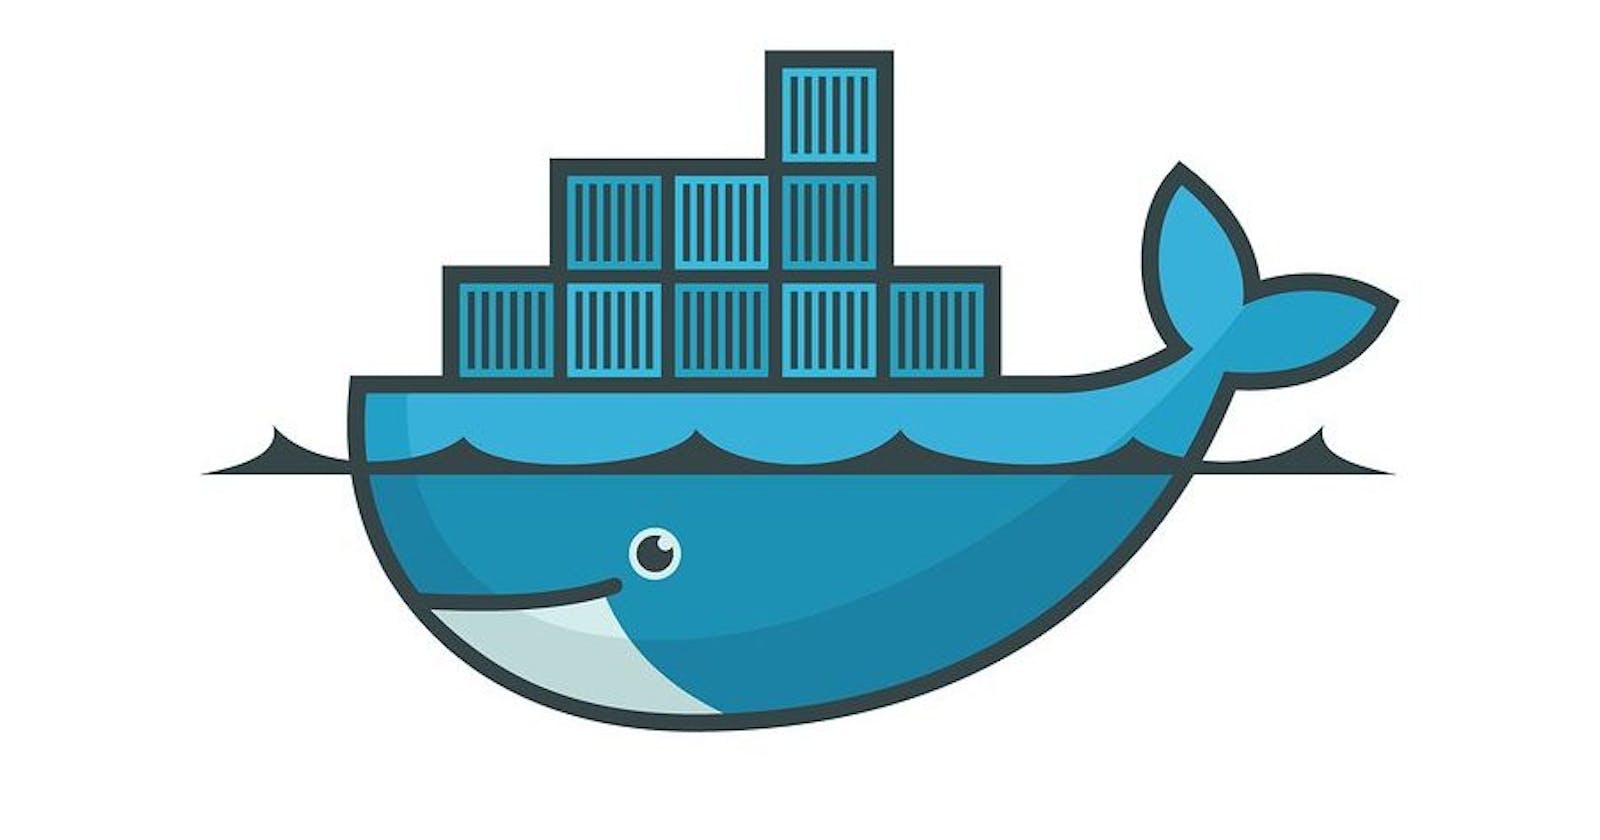 Getting started with containerization and docker